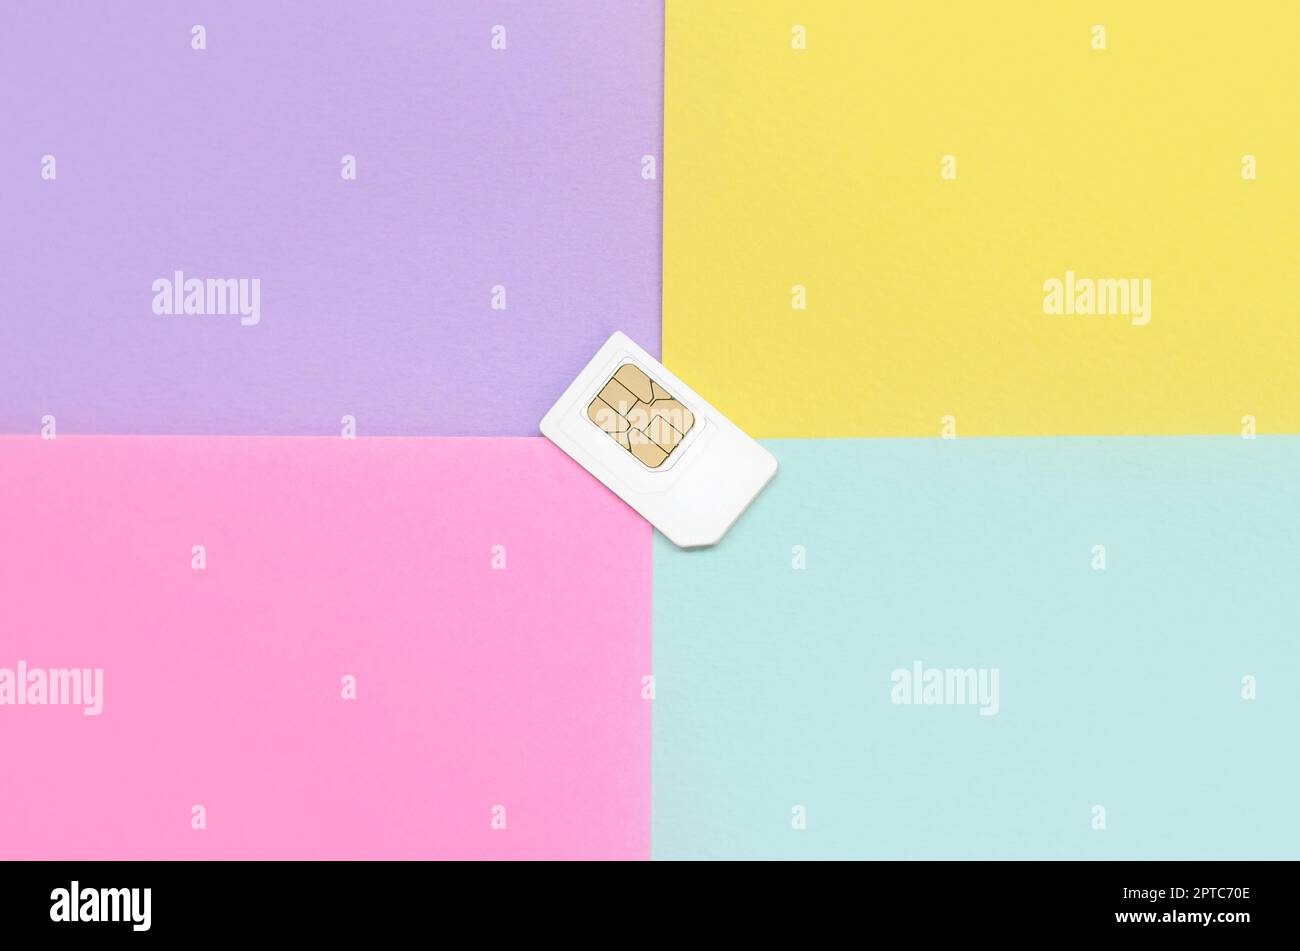 Subscriber identity module. New white SIM card on bright multicolor background. Minimal flat lay top view. Violet, pink, yellow and blue pastel colors Stock Photo